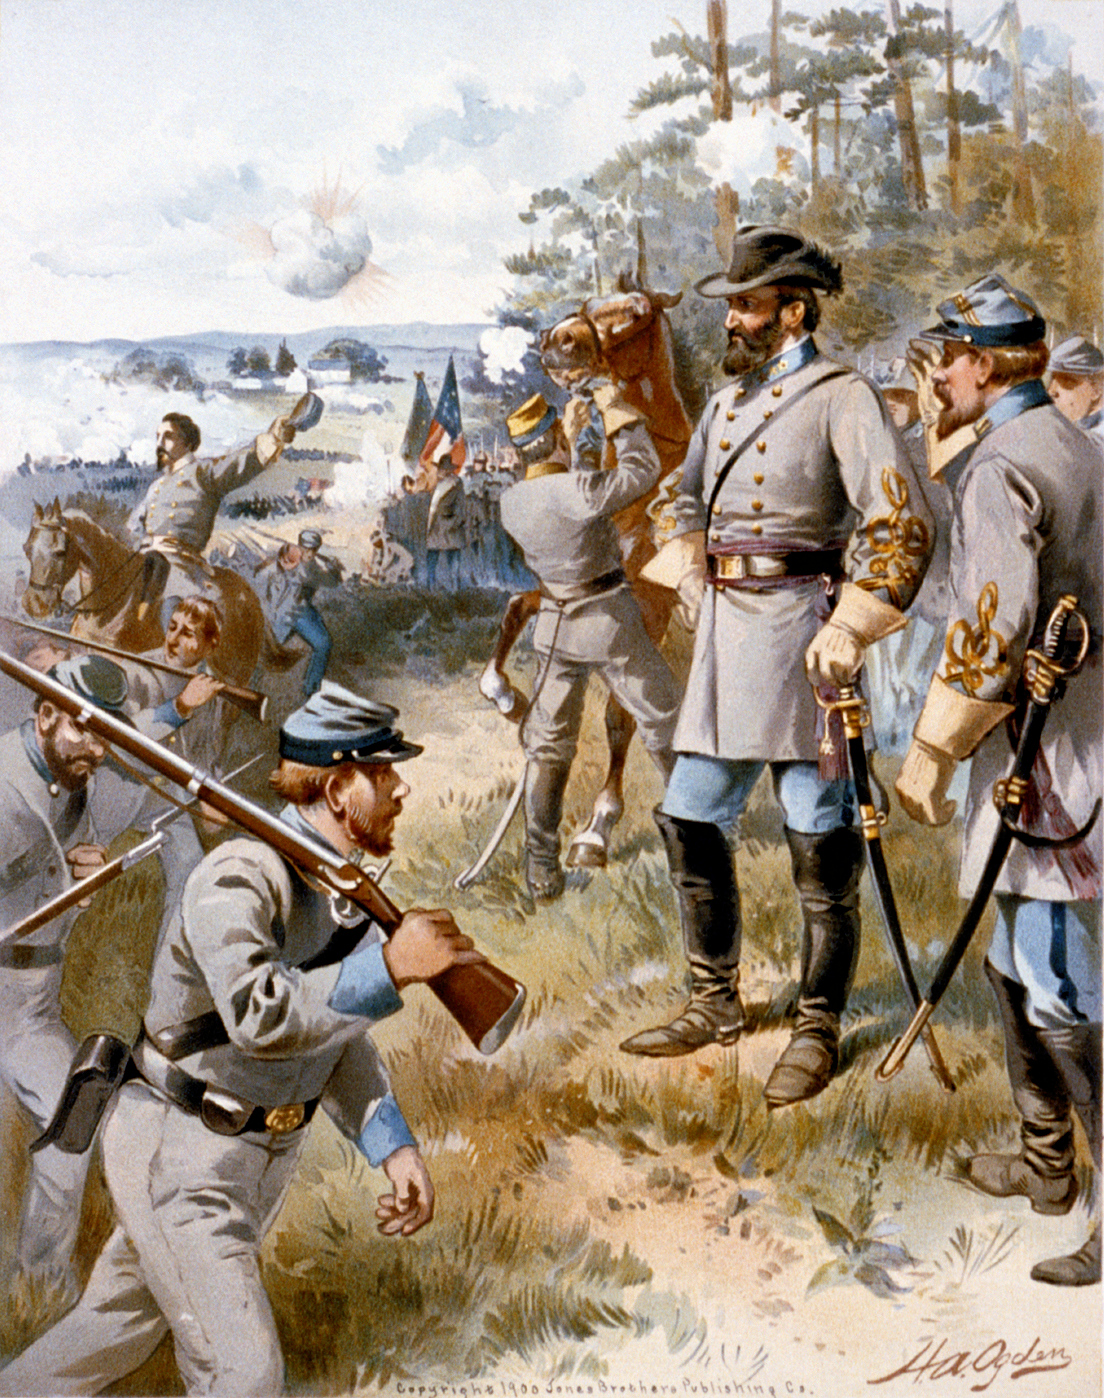 Stonewall Jackson at Bull Run - Print shows General Stonewall Jackson standing on a ridge with soldiers, one holding Jackson's horse, monitoring the action of the battle at Bull Run, Virginia. Print by Henry Alexander Ogden.